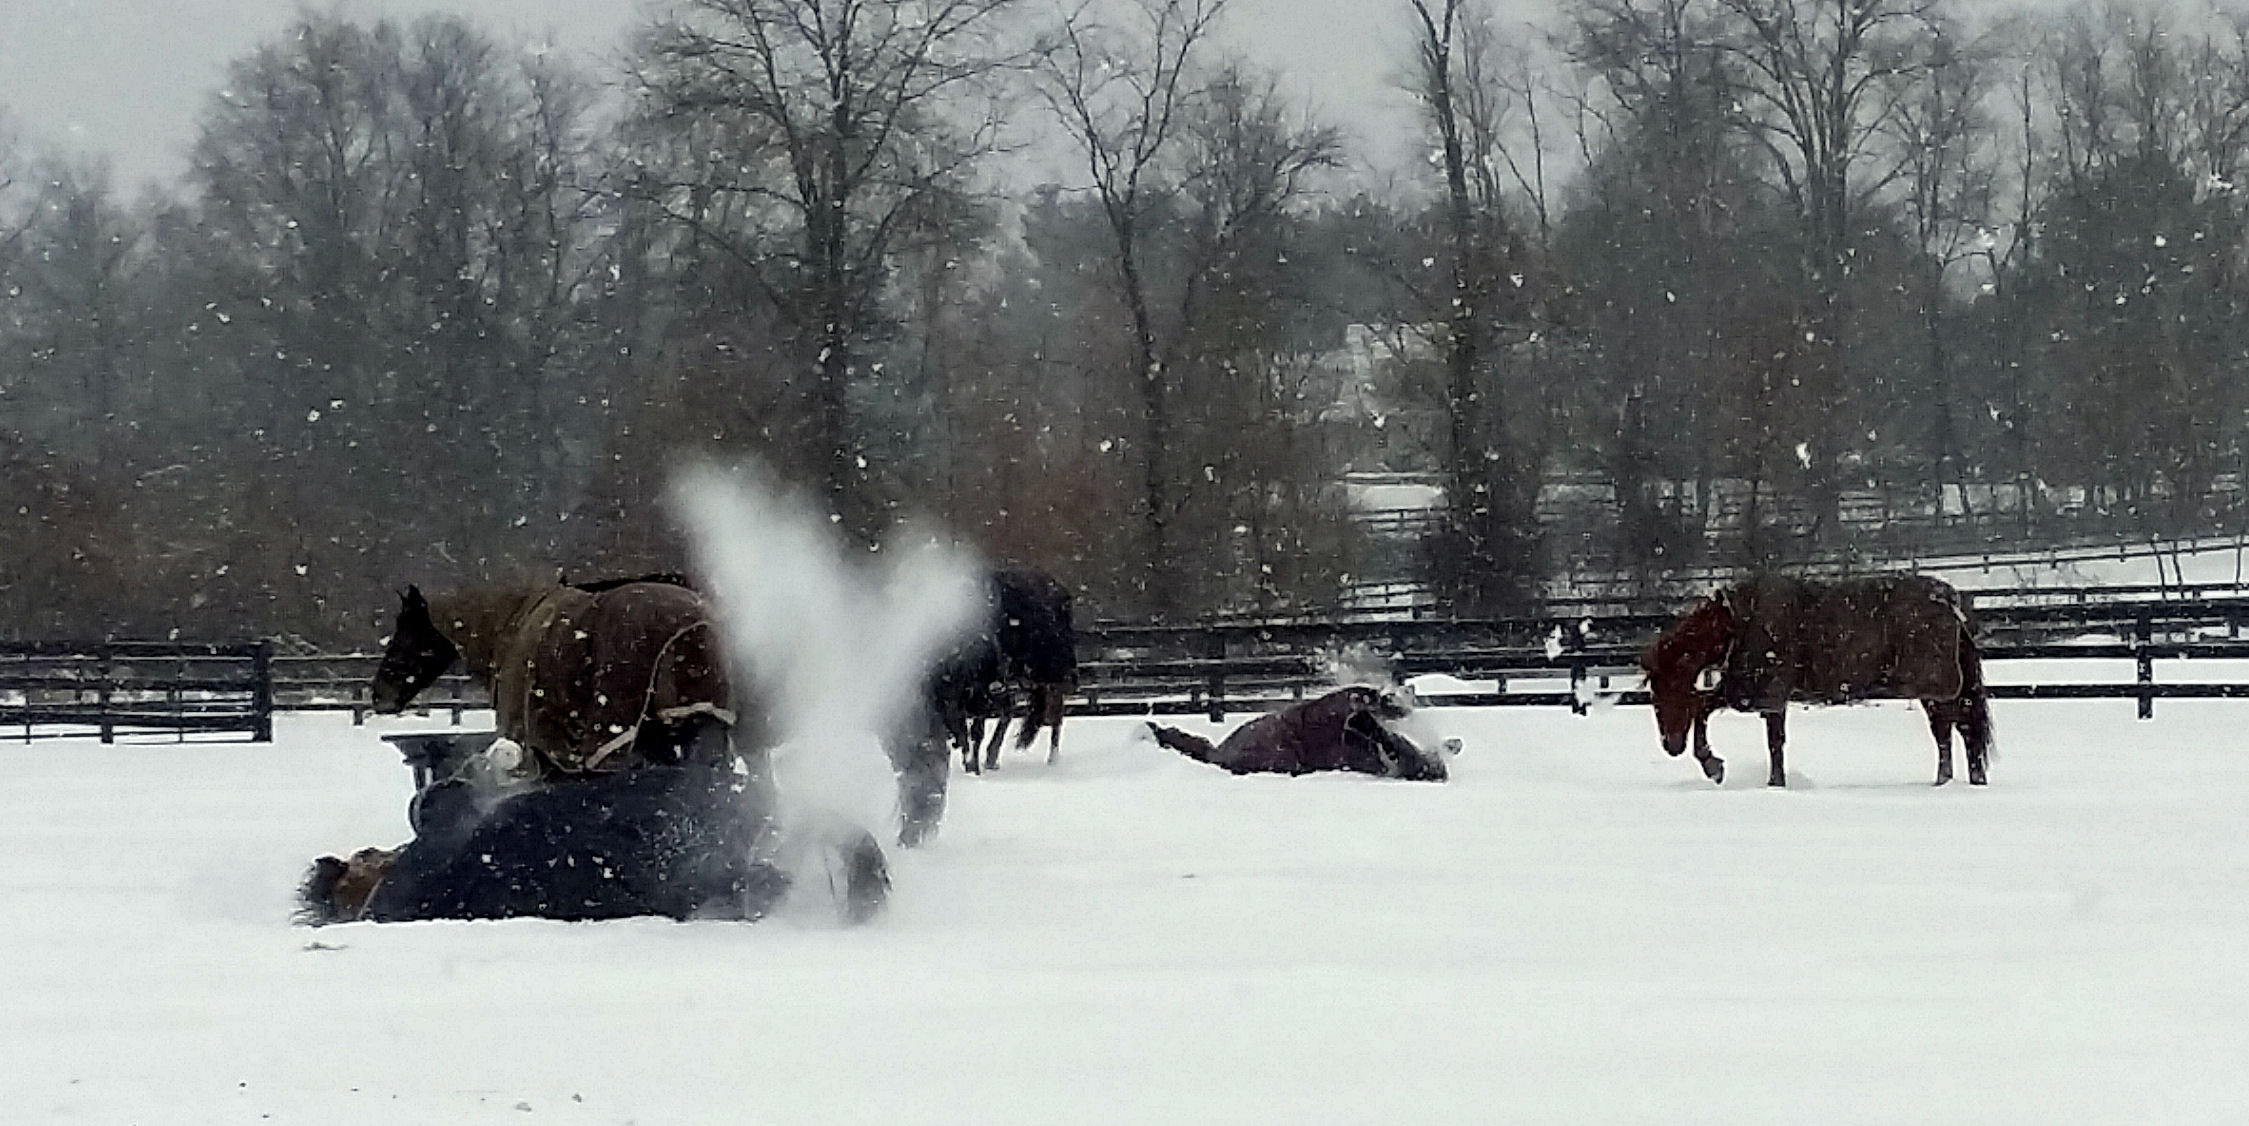 Horses rolling in the snow